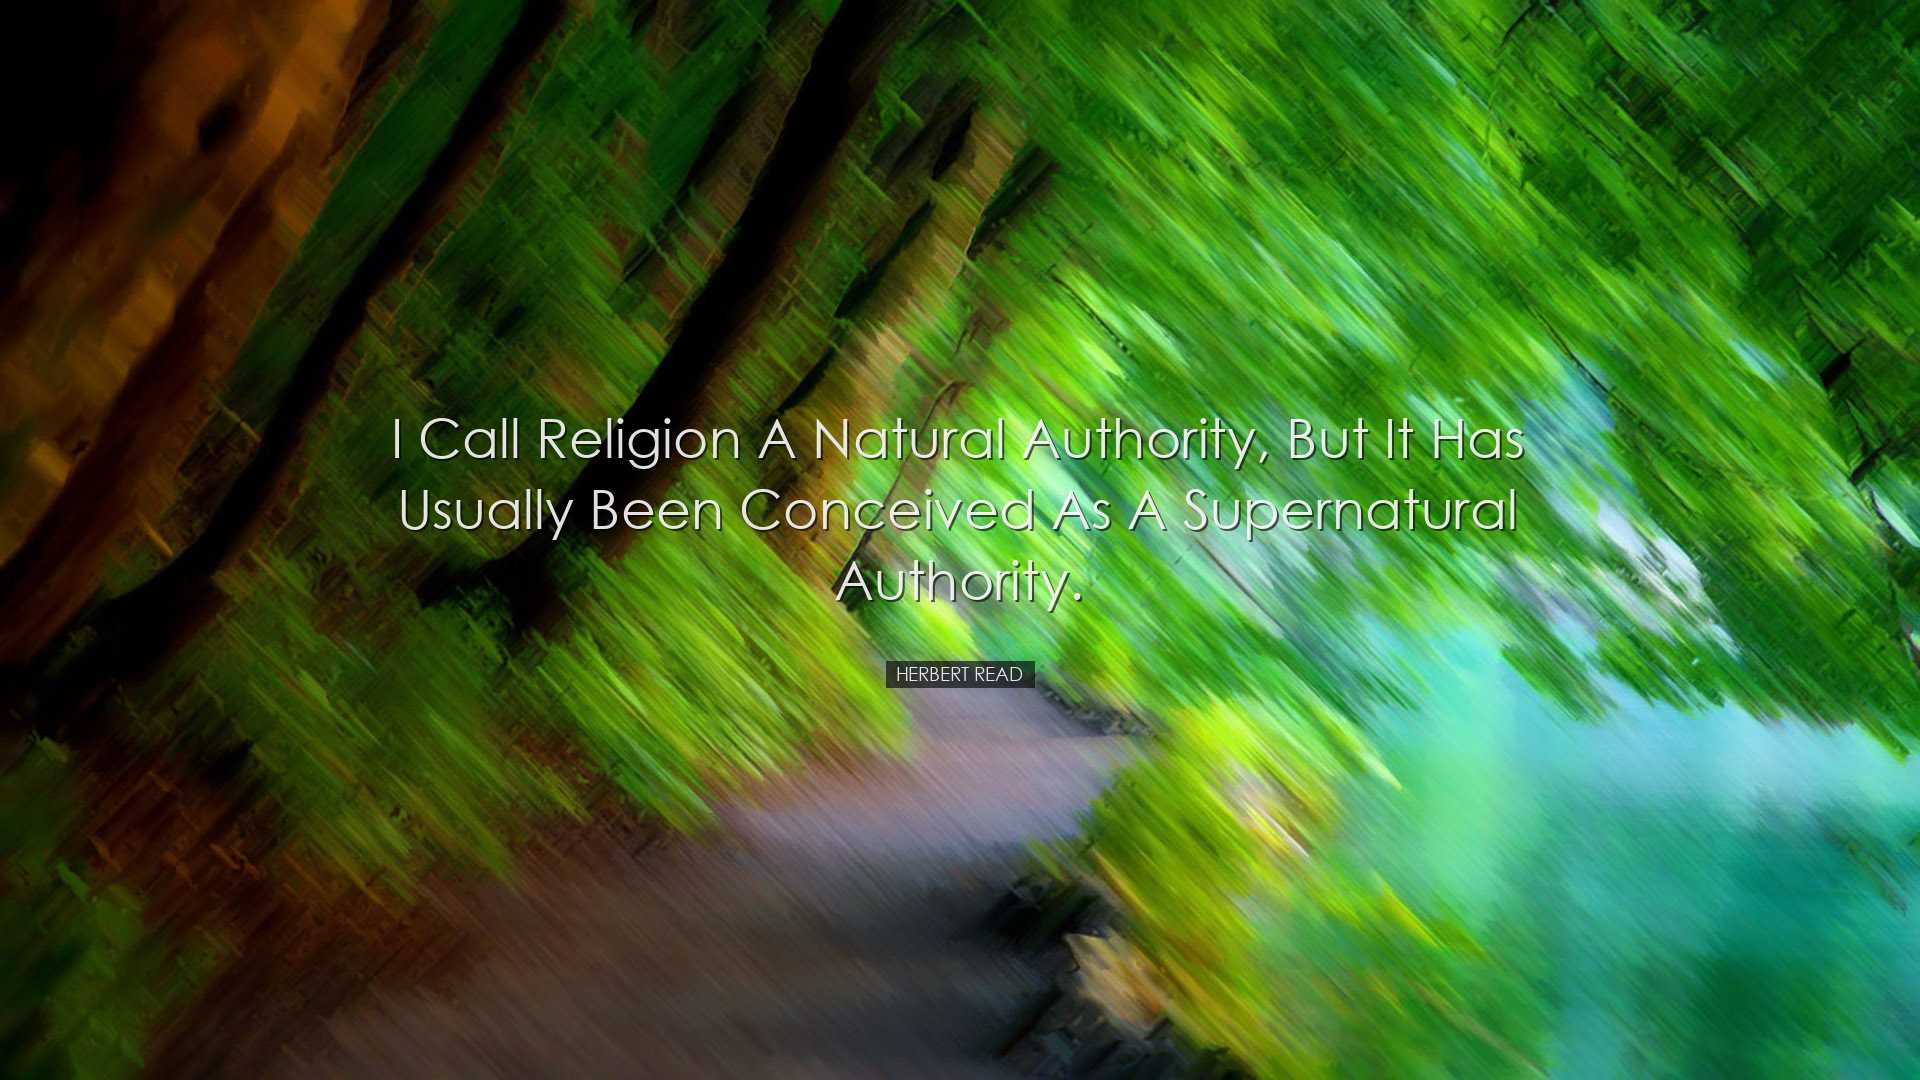 I call religion a natural authority, but it has usually been conce